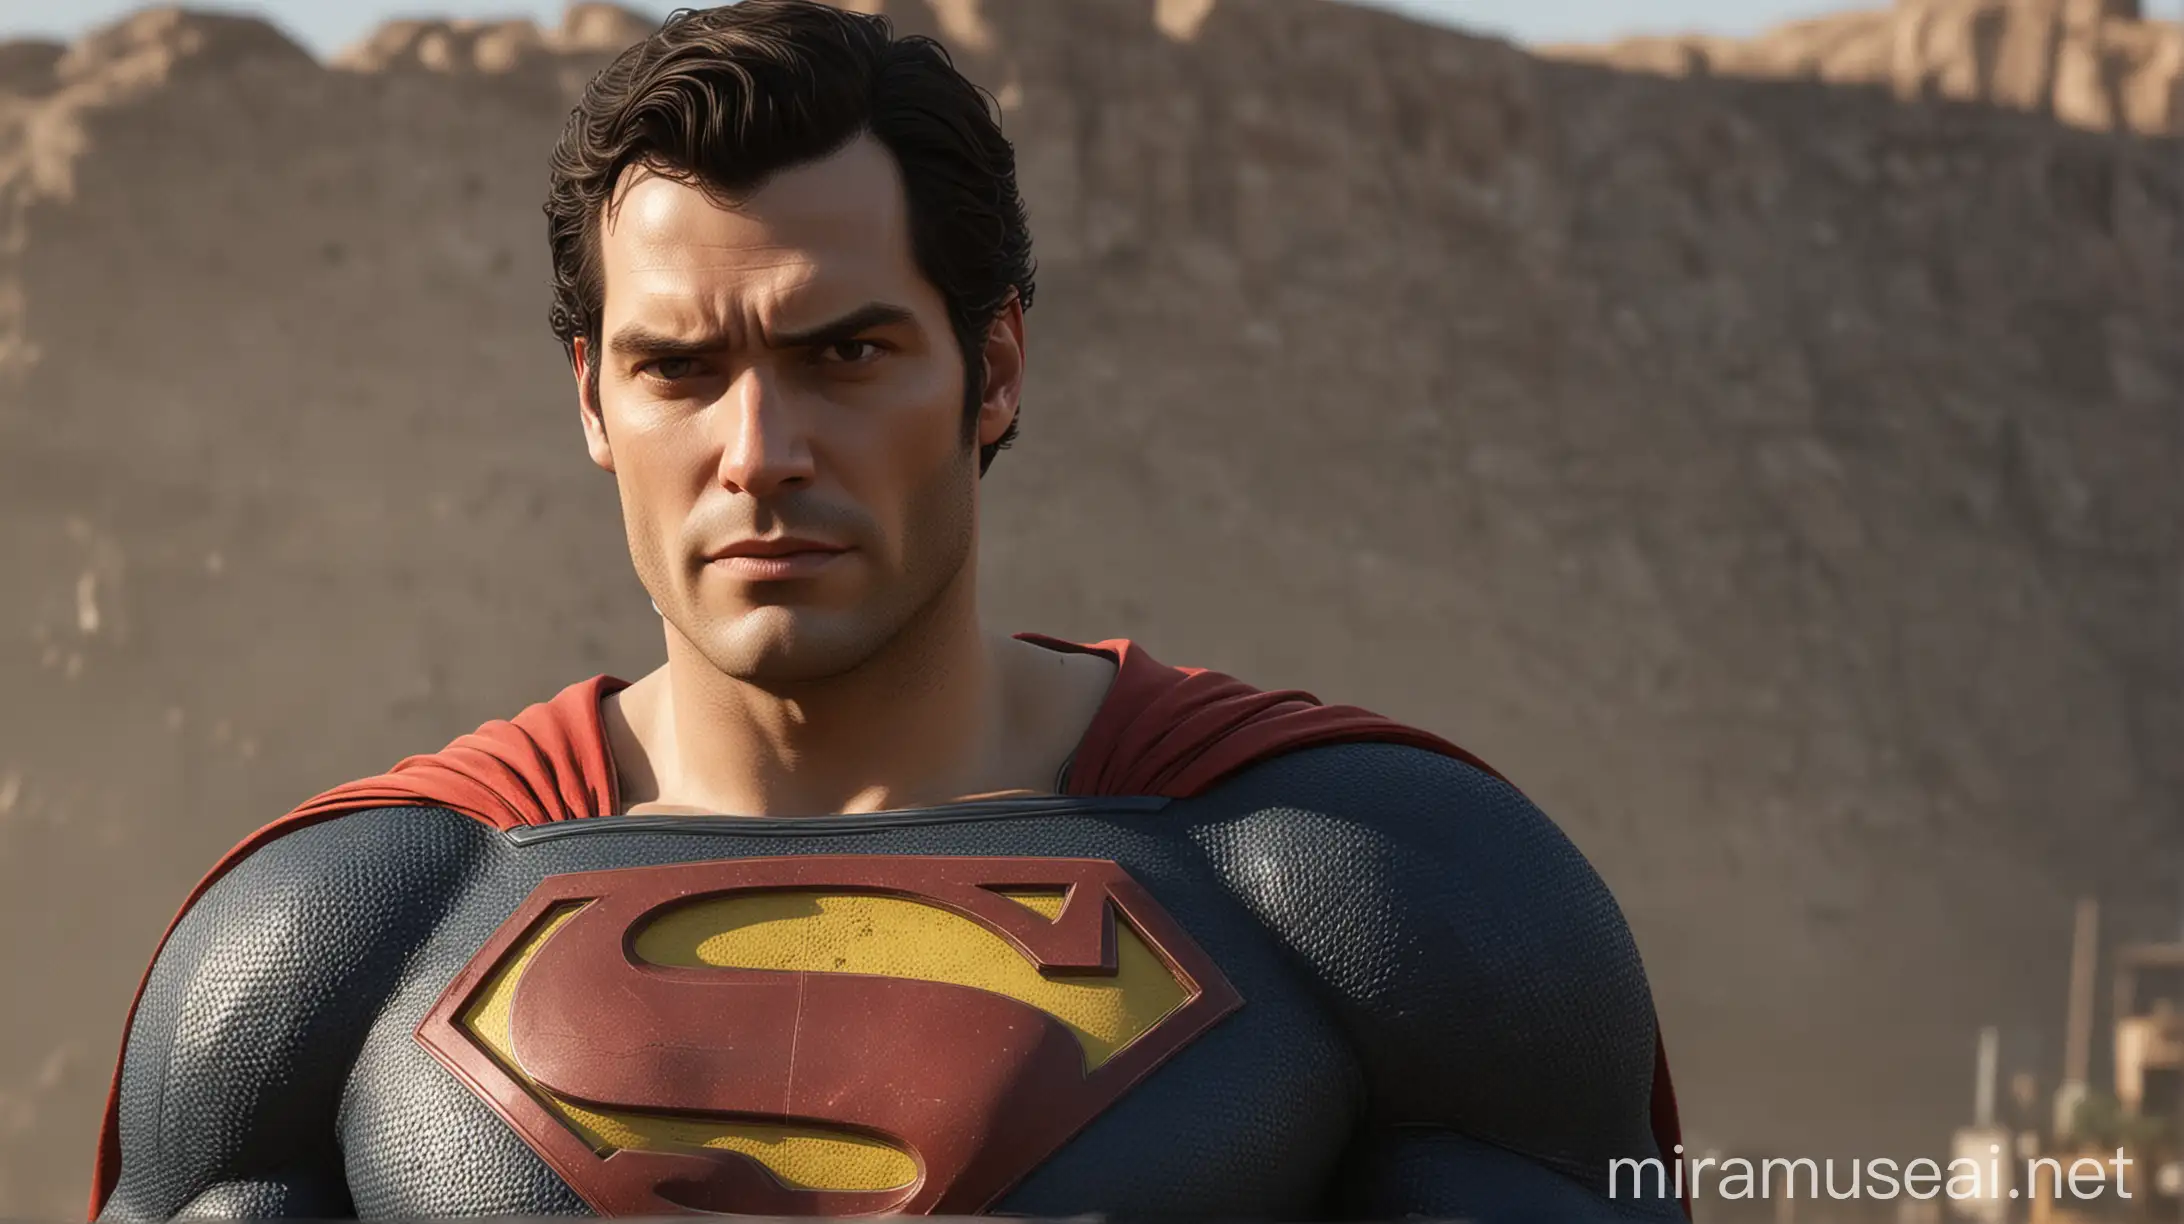 henry cavill's superman in the style of Borderlands, unreal engine, octane render, 8k, uhd, raytraced lighting, realistic shadows, action posehenry cavill's superman in the style of Borderlands, unreal engine, octane render, 8k, uhd, raytraced lighting, realistic shadows, action pose